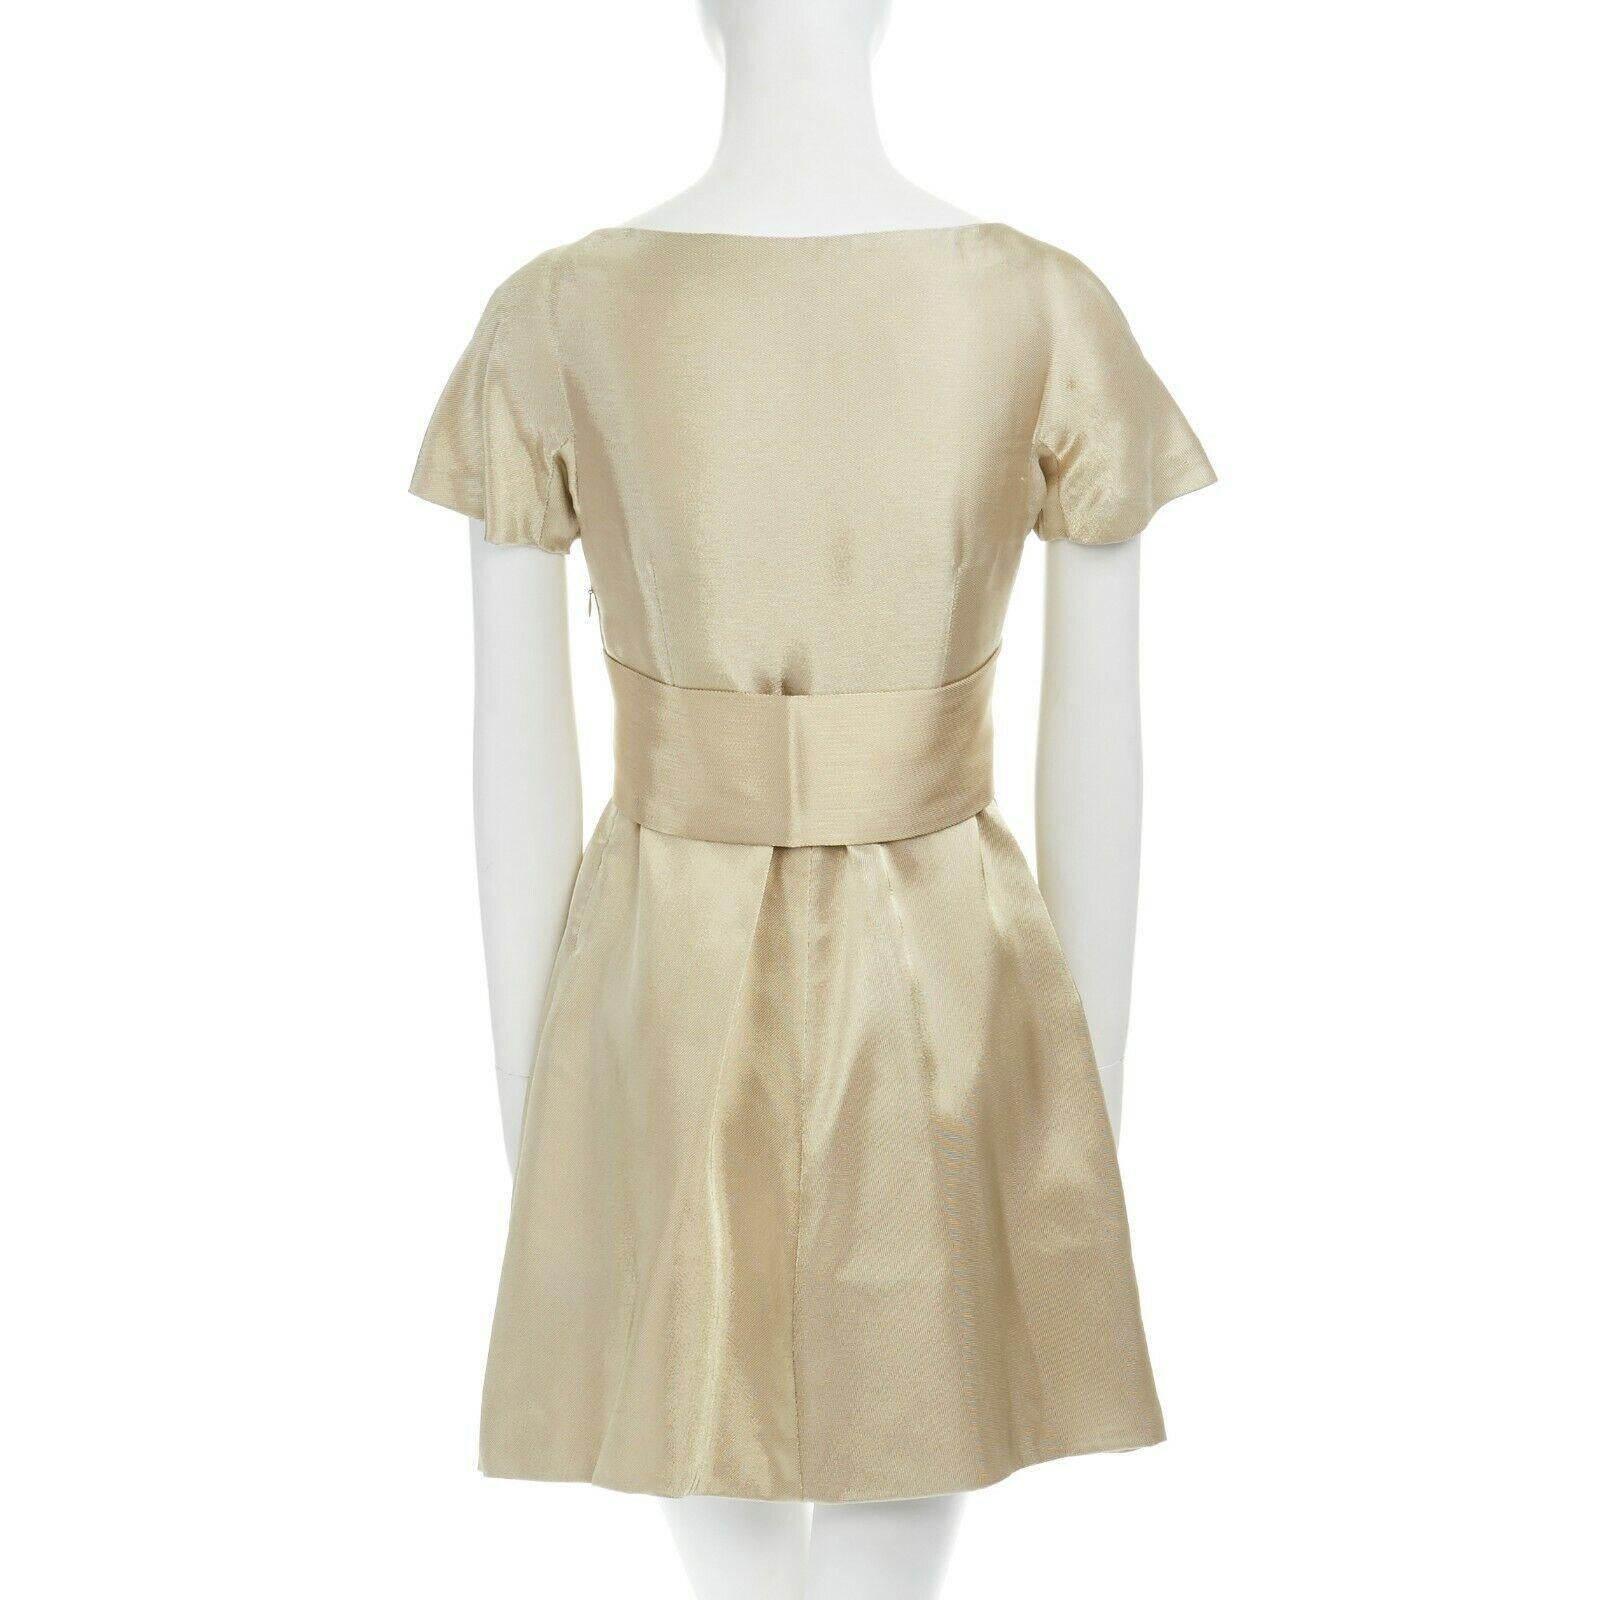 runway ALEXANDER MCQUEEN Vintage SS06 gold bow cocktail dress IT38 US0 UK6 S
ALEXANDER MCQUEEN
RAYON-VISCOSE, SILK, POLYESTER, ACETATE. METALLIC GOLD. 
V NECK. SHORT SLEEVES. DETACHABLE BOW RIBBON BELT. 
BELT SNAP BUTTON FRONT. FITTED AT HIGH WAIST.